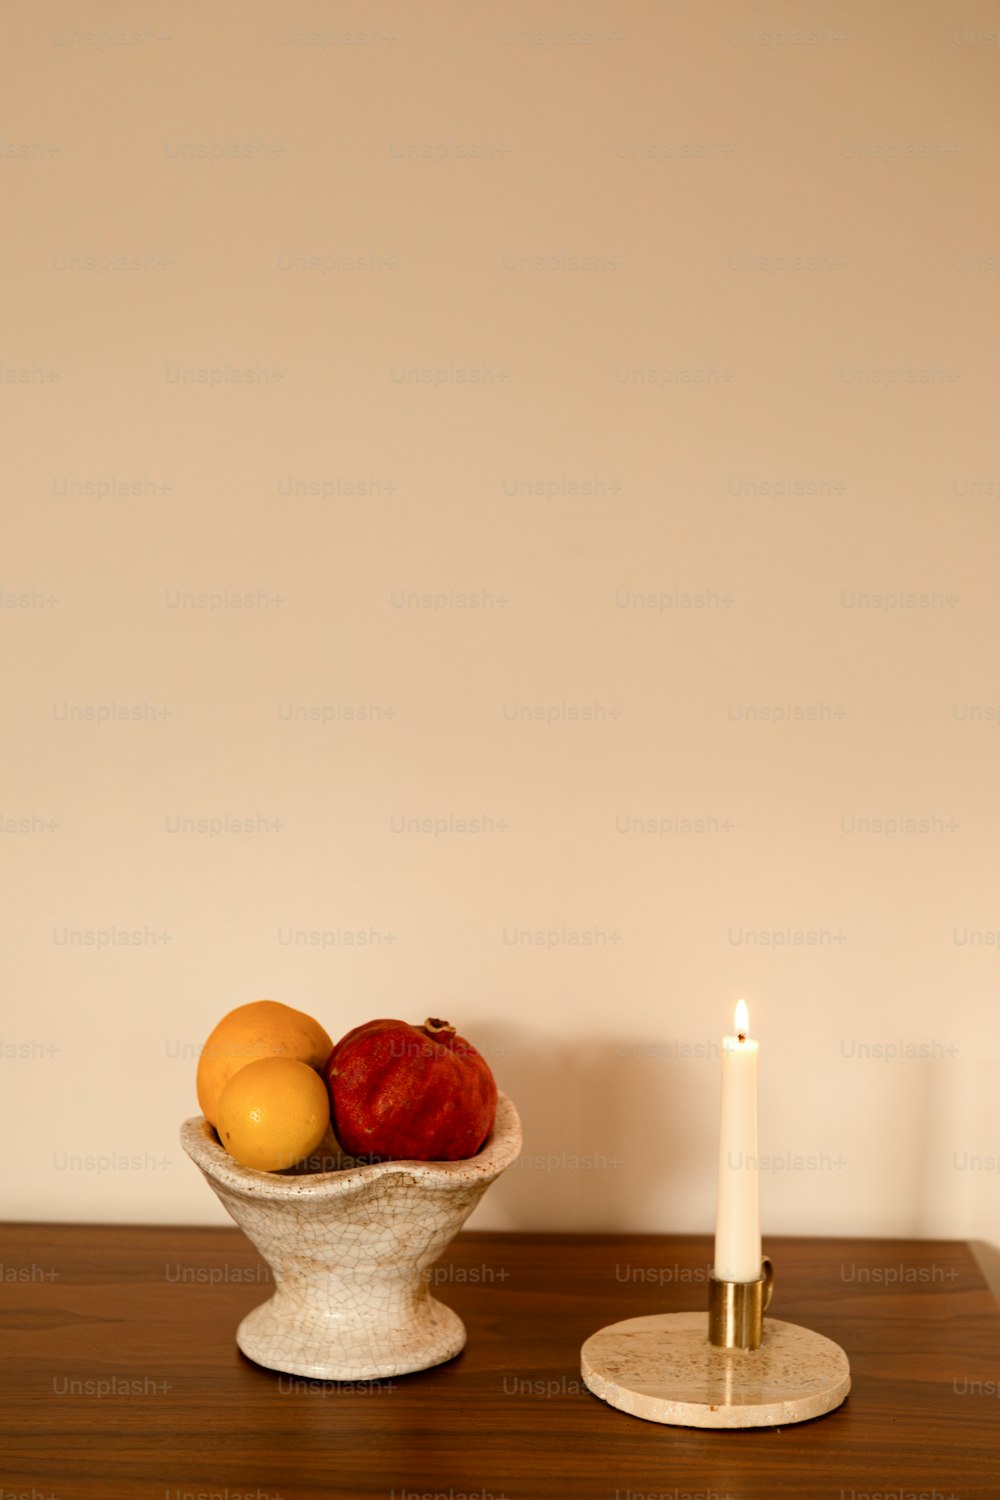 a bowl of fruit on a table next to a candle